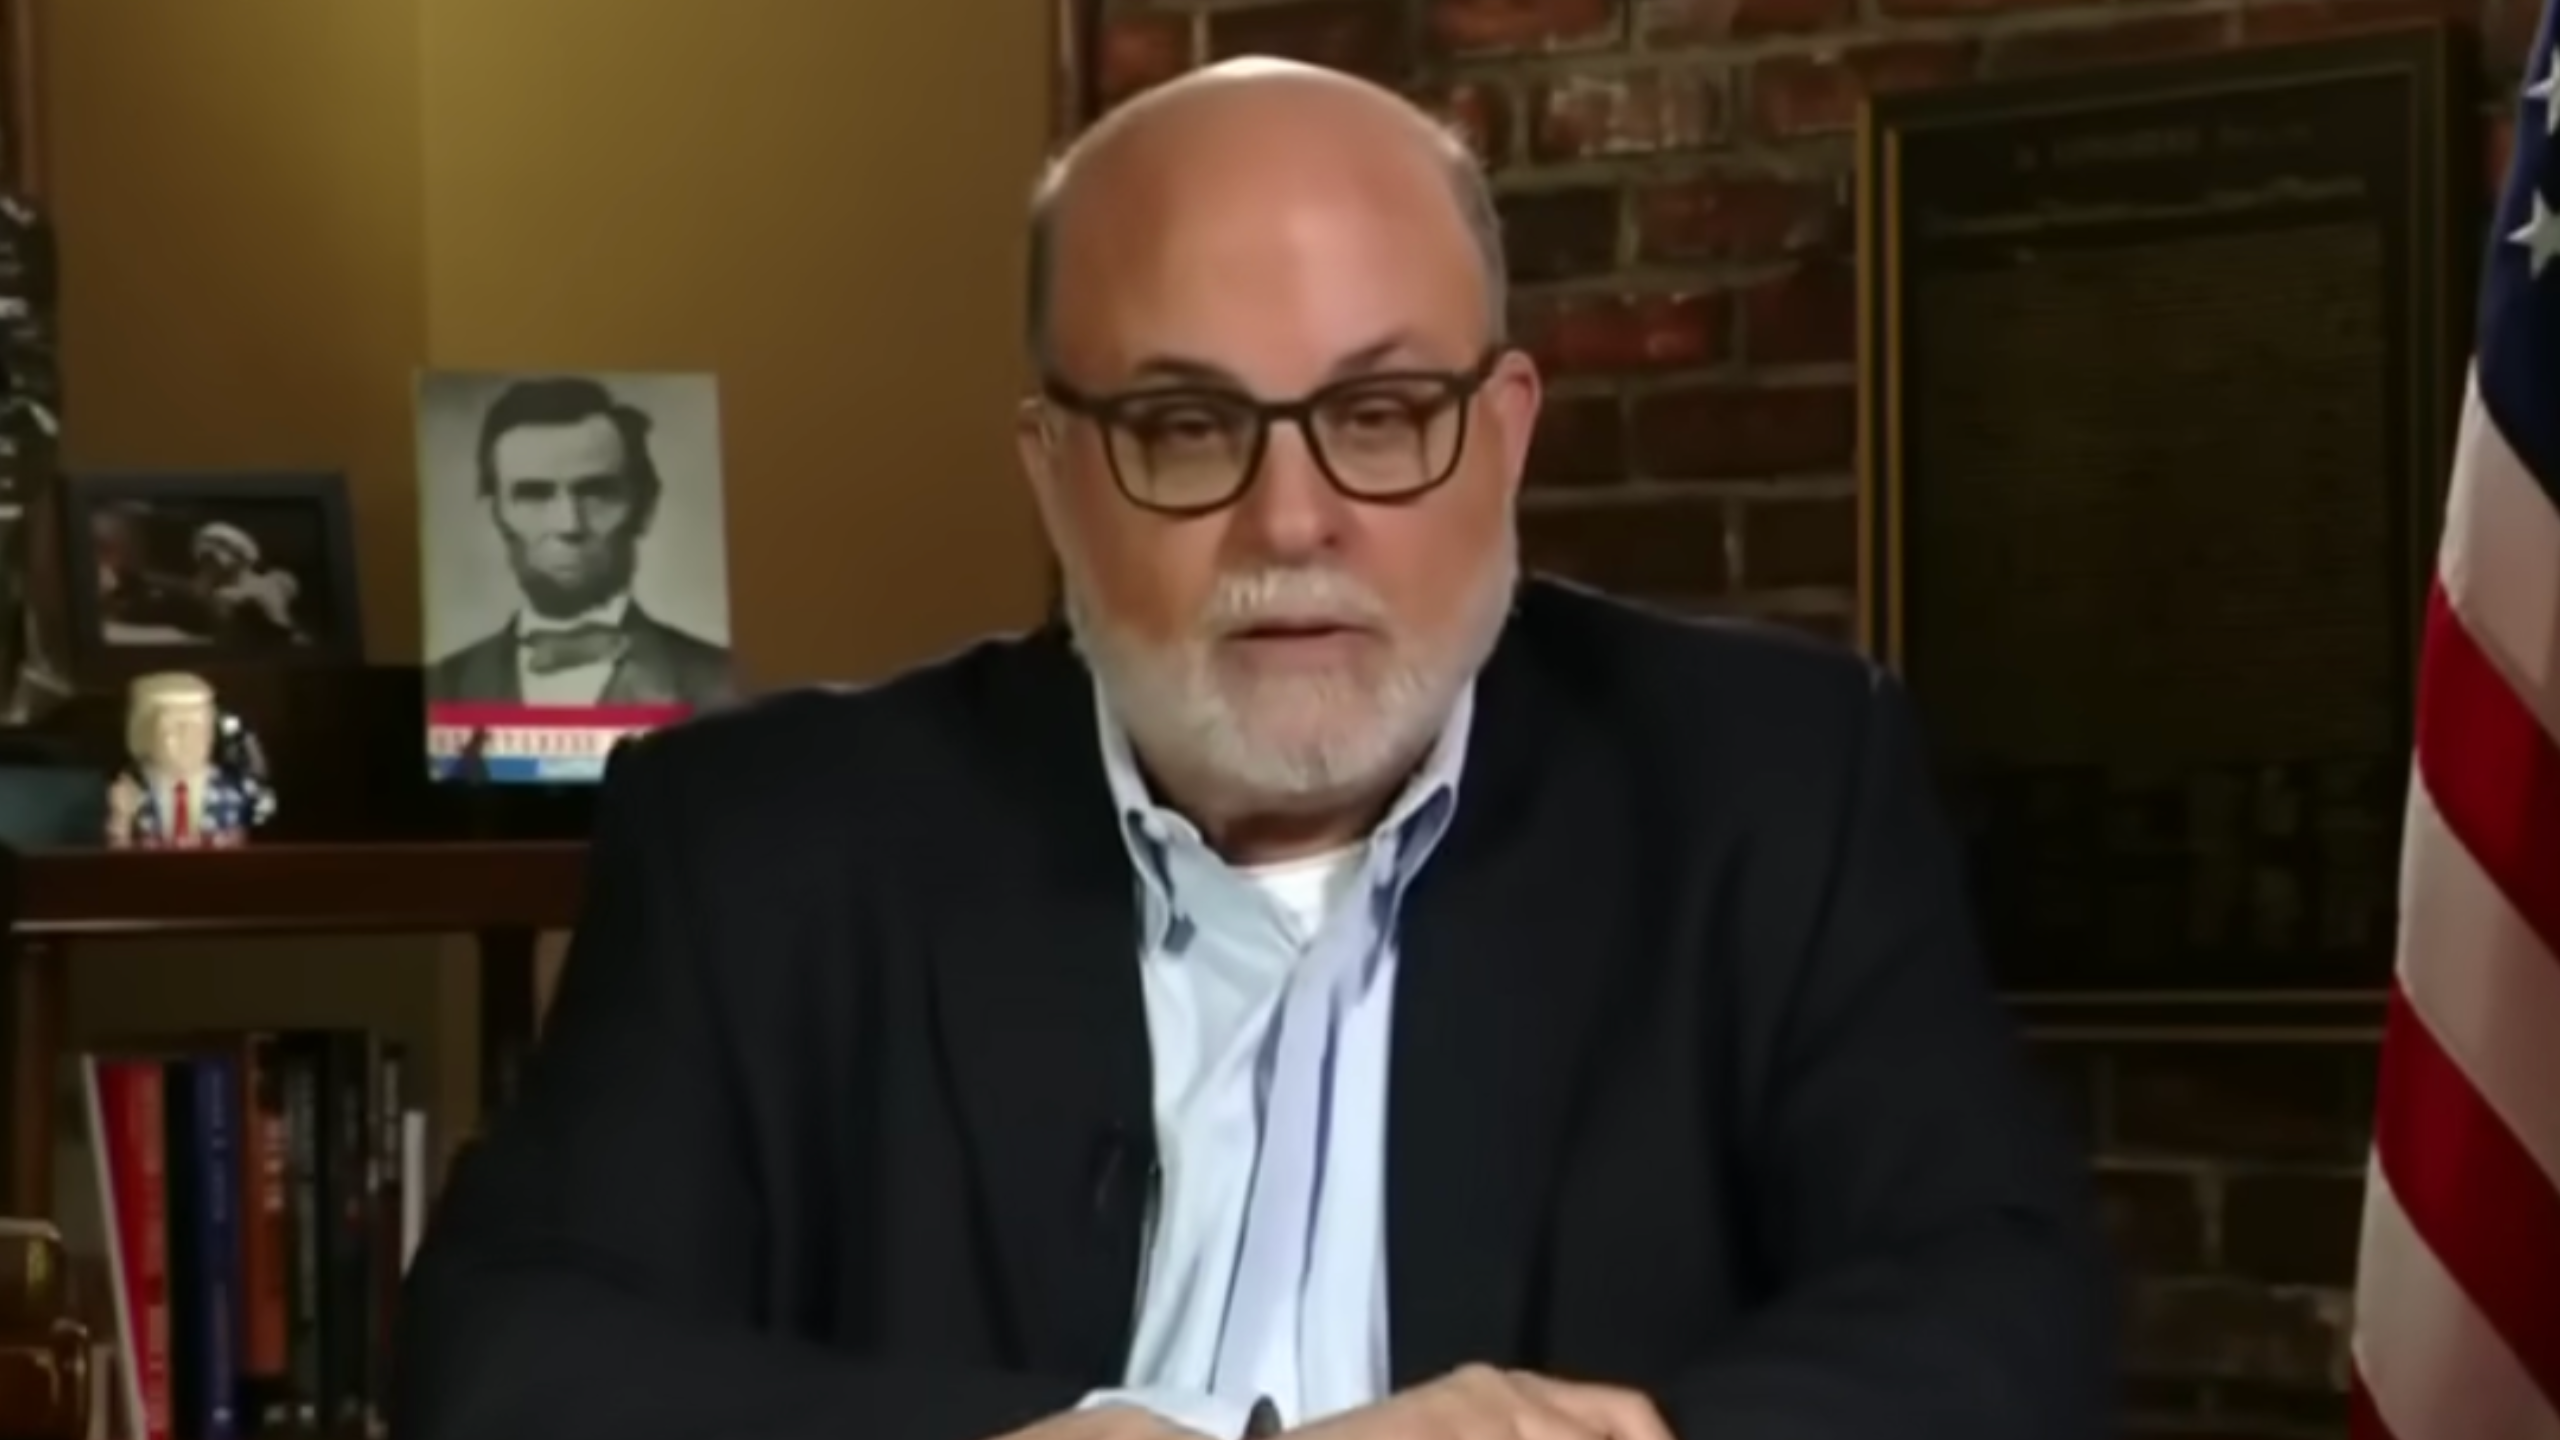 Mark Levin Demands to Know Why Republican Billionaires Aren’t Posting Trump’s $454 Million Bond: ‘This Is an Outrage’ (mediaite.com)